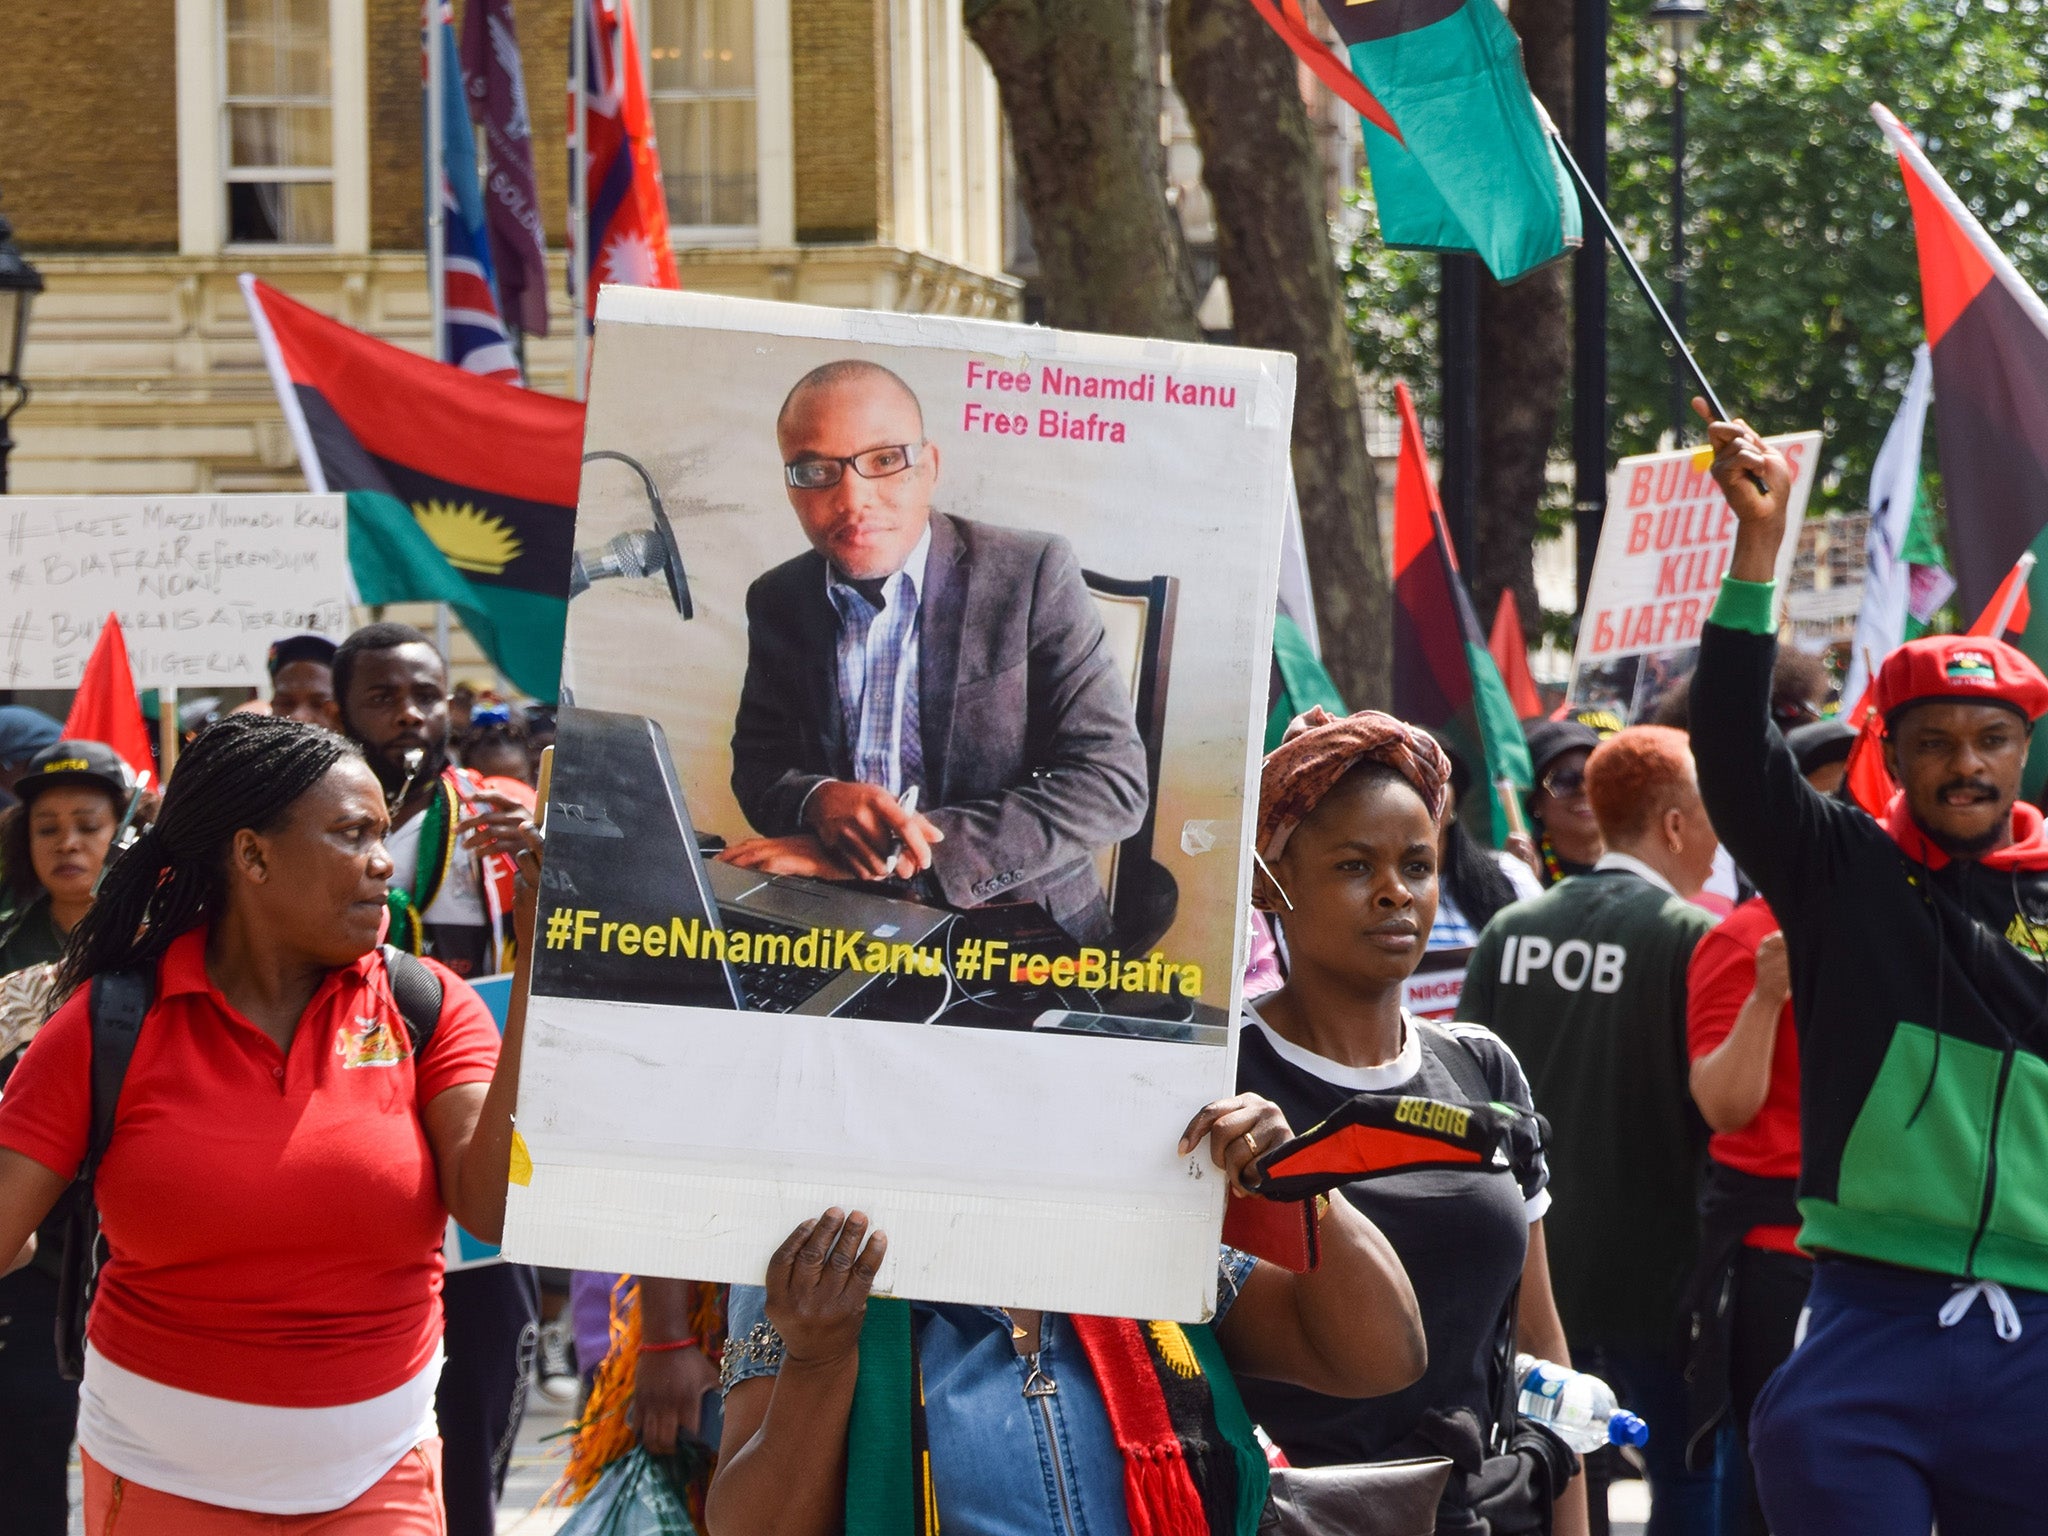 Demonstrators outside Downing Street in July this year demanding the release of Nnamdi Kanu